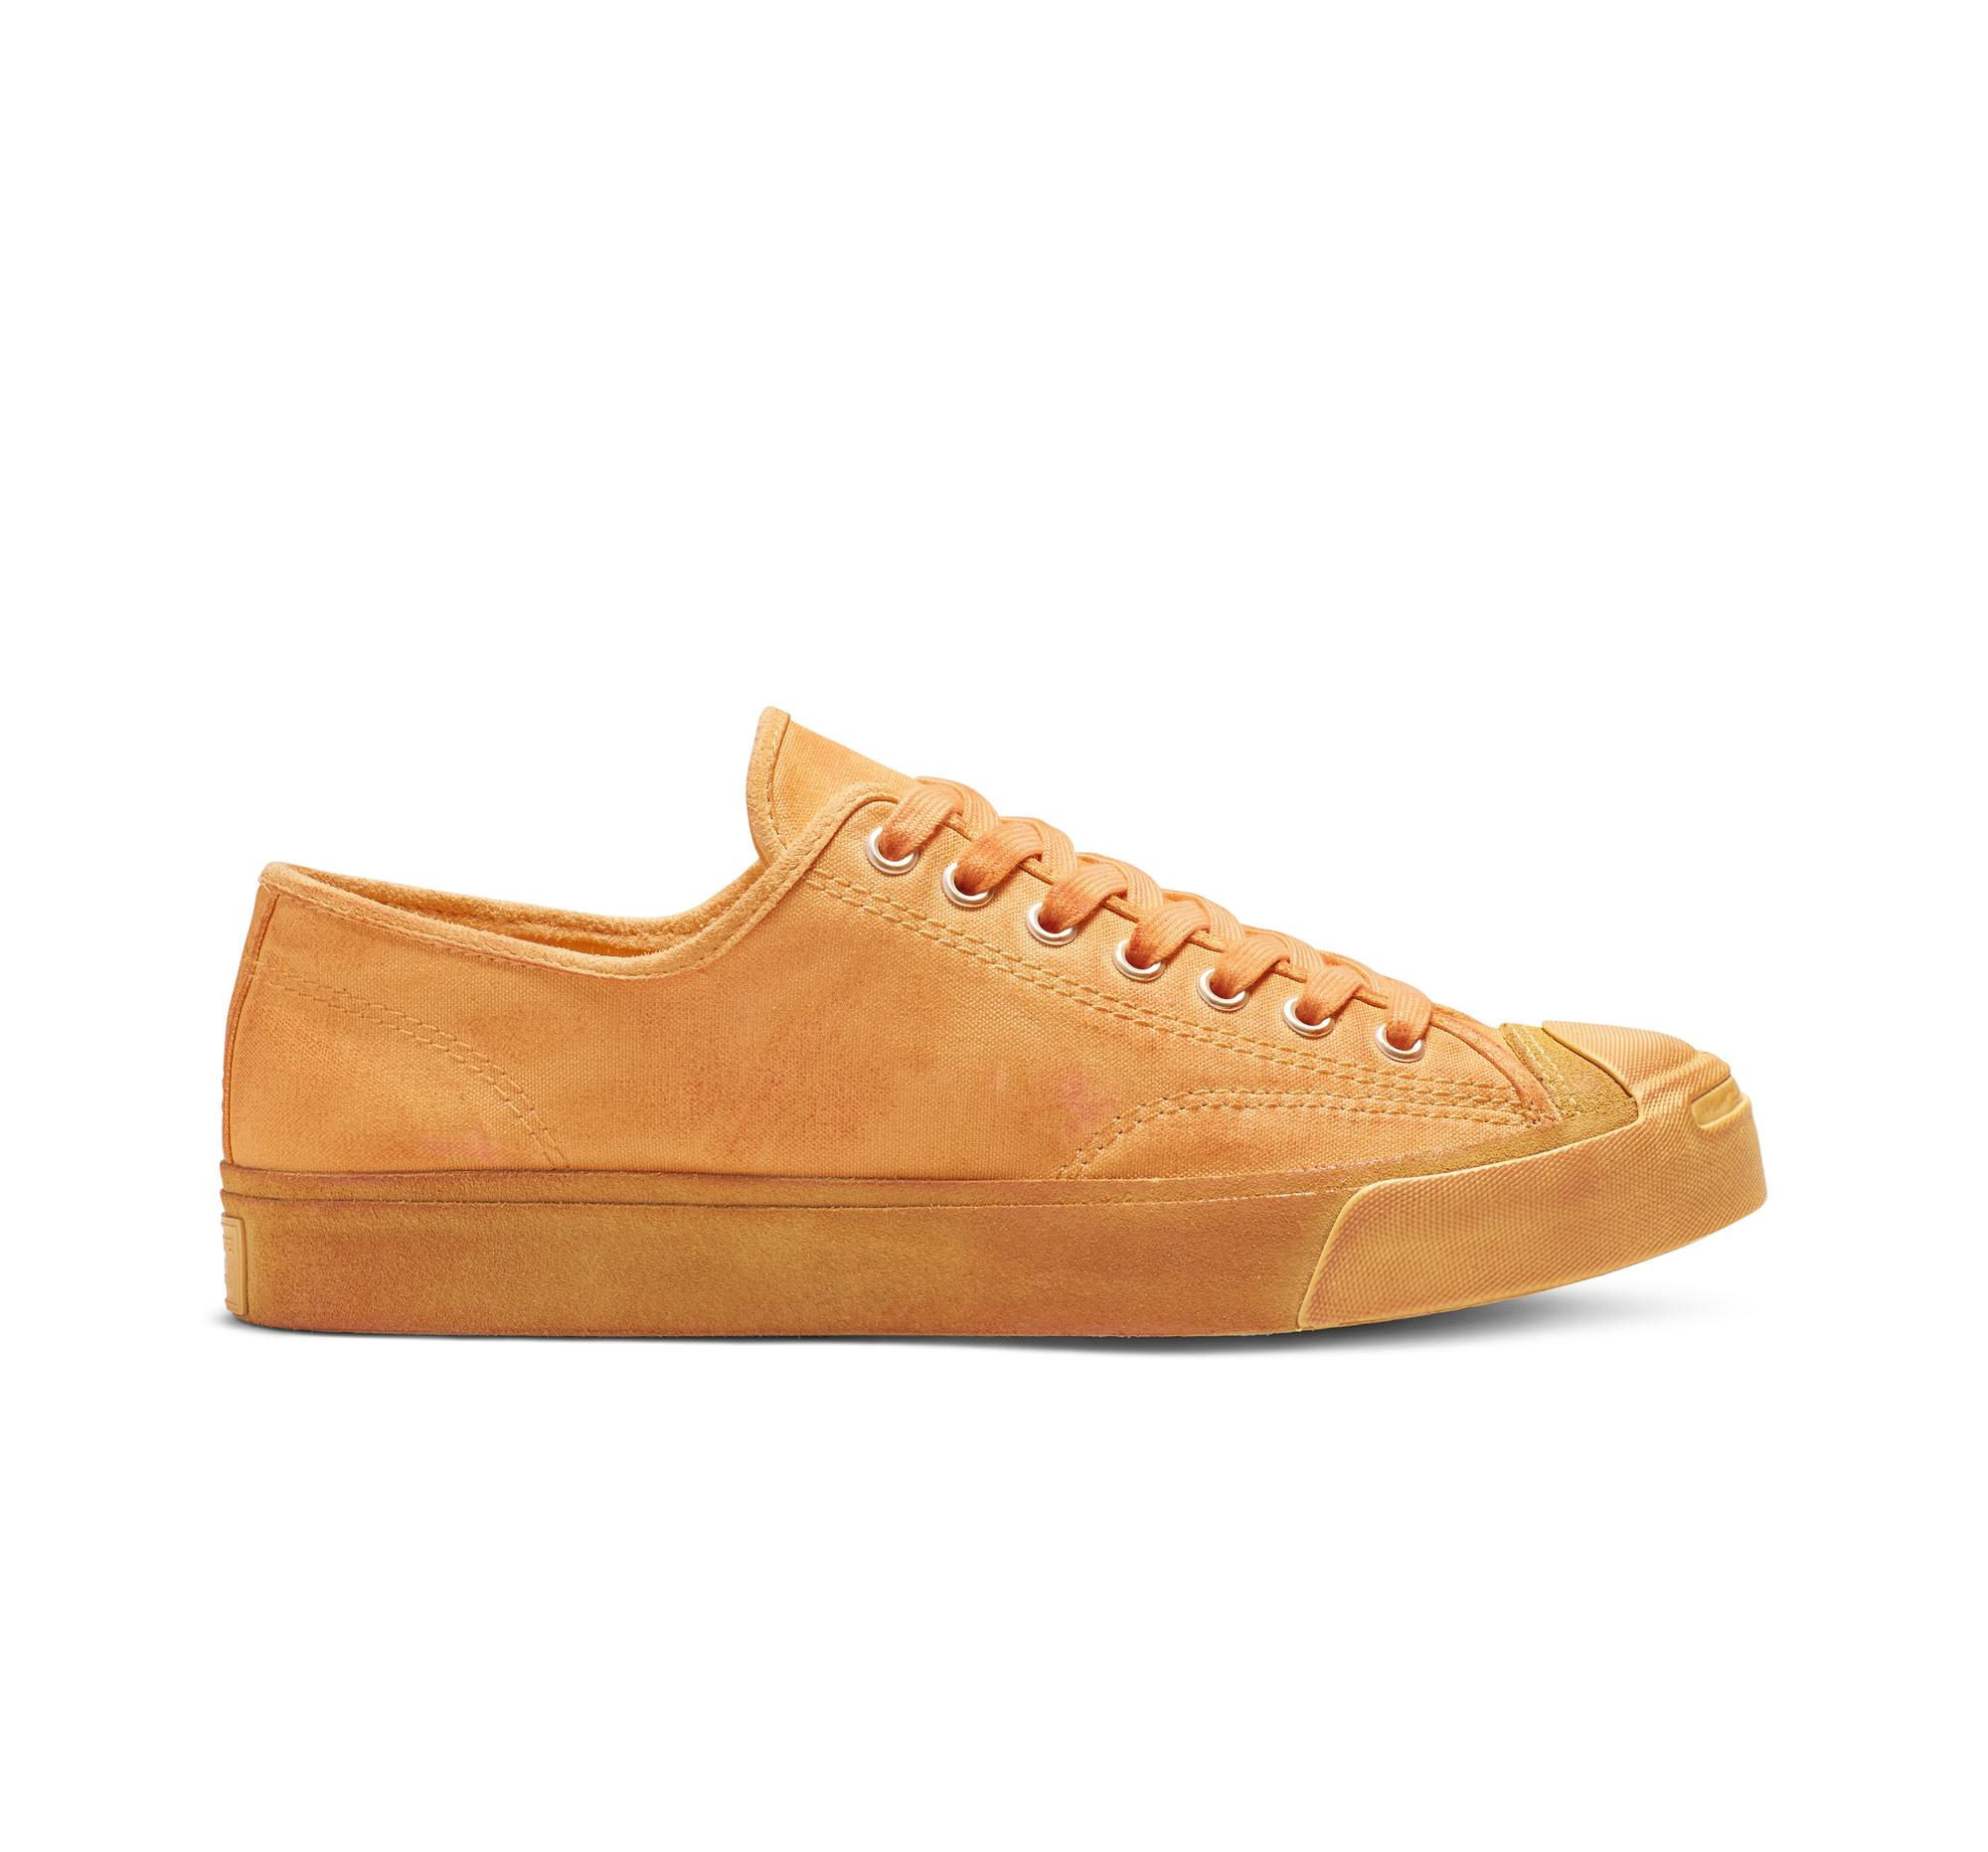 Converse Jack Purcell Burnished Suede Low Top in Orange for Men - Lyst